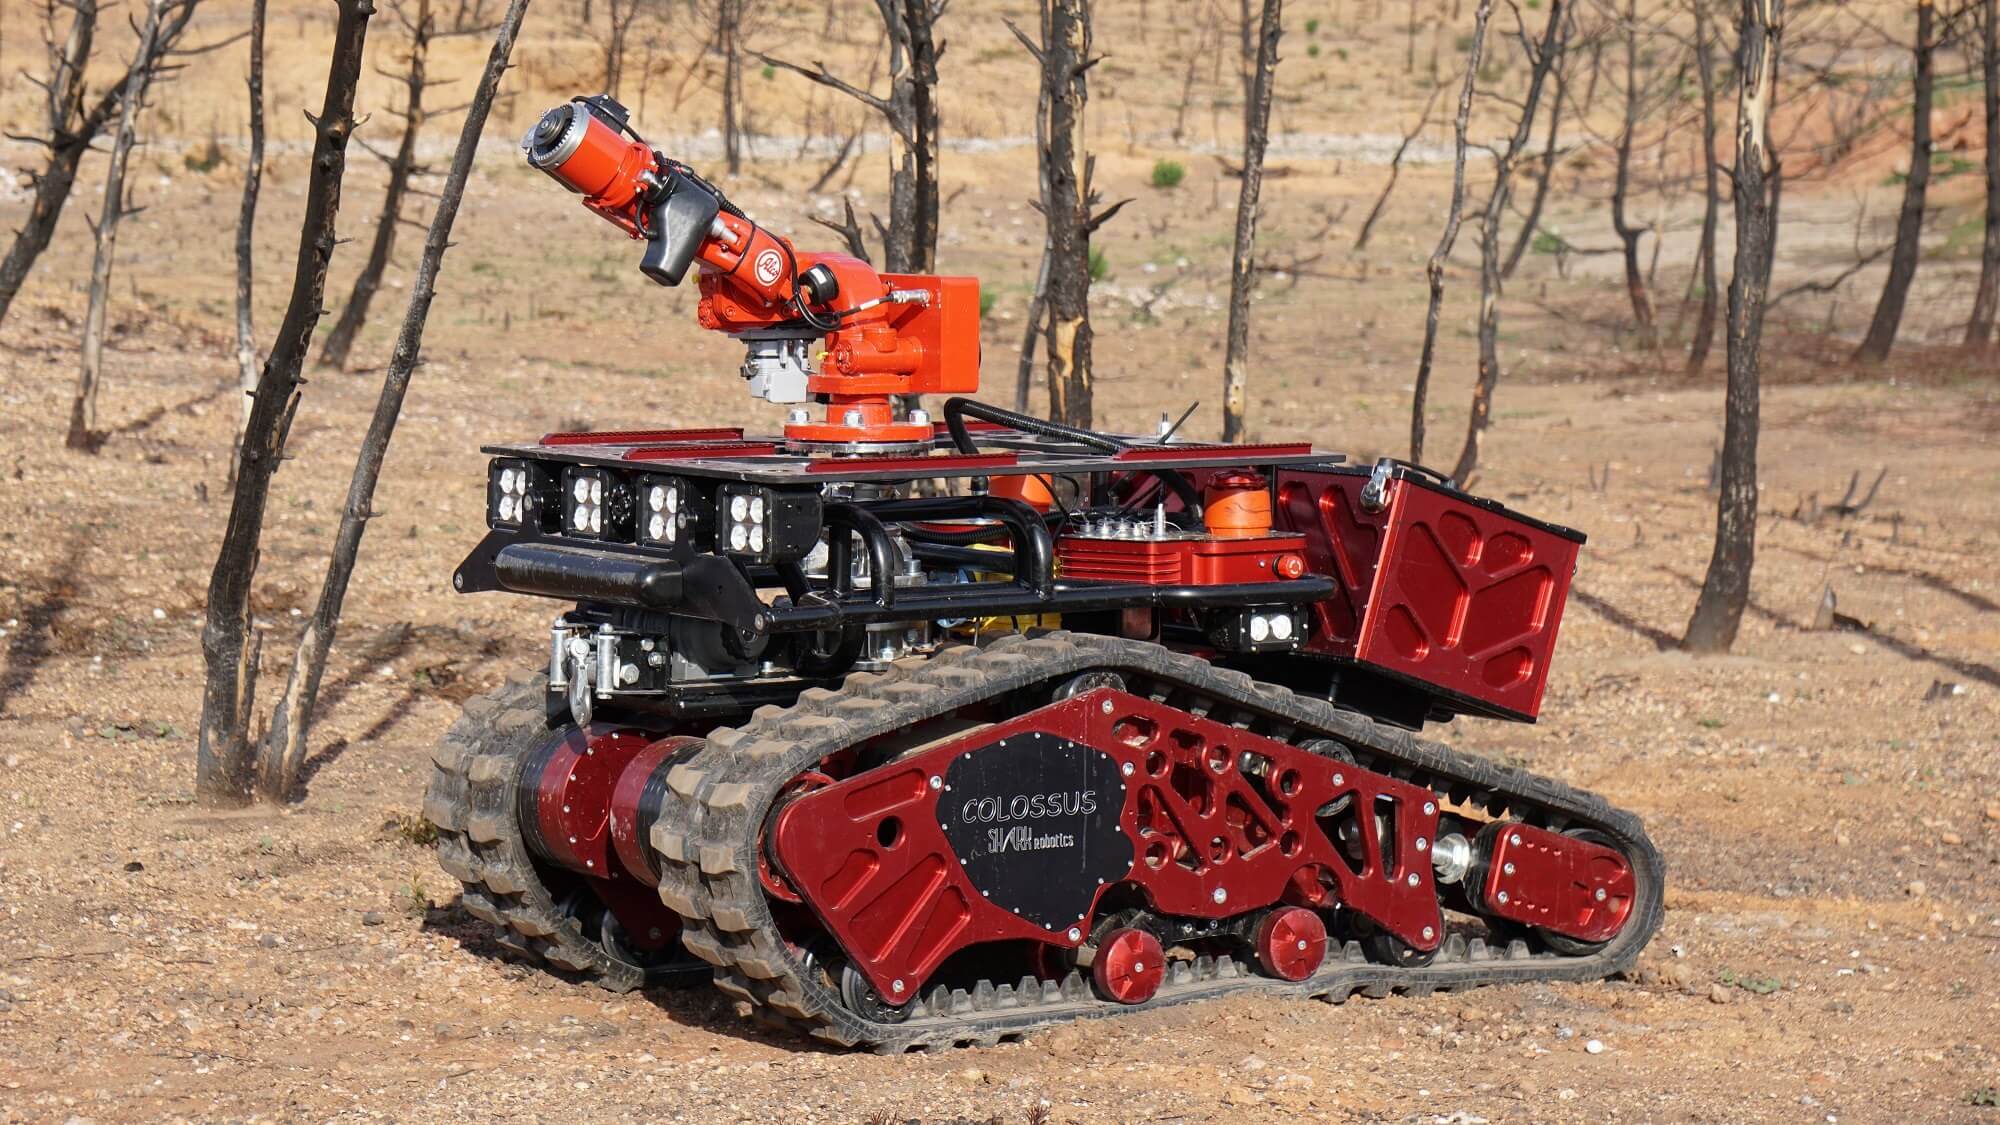 Nine Days To A Better Firefighting Robots